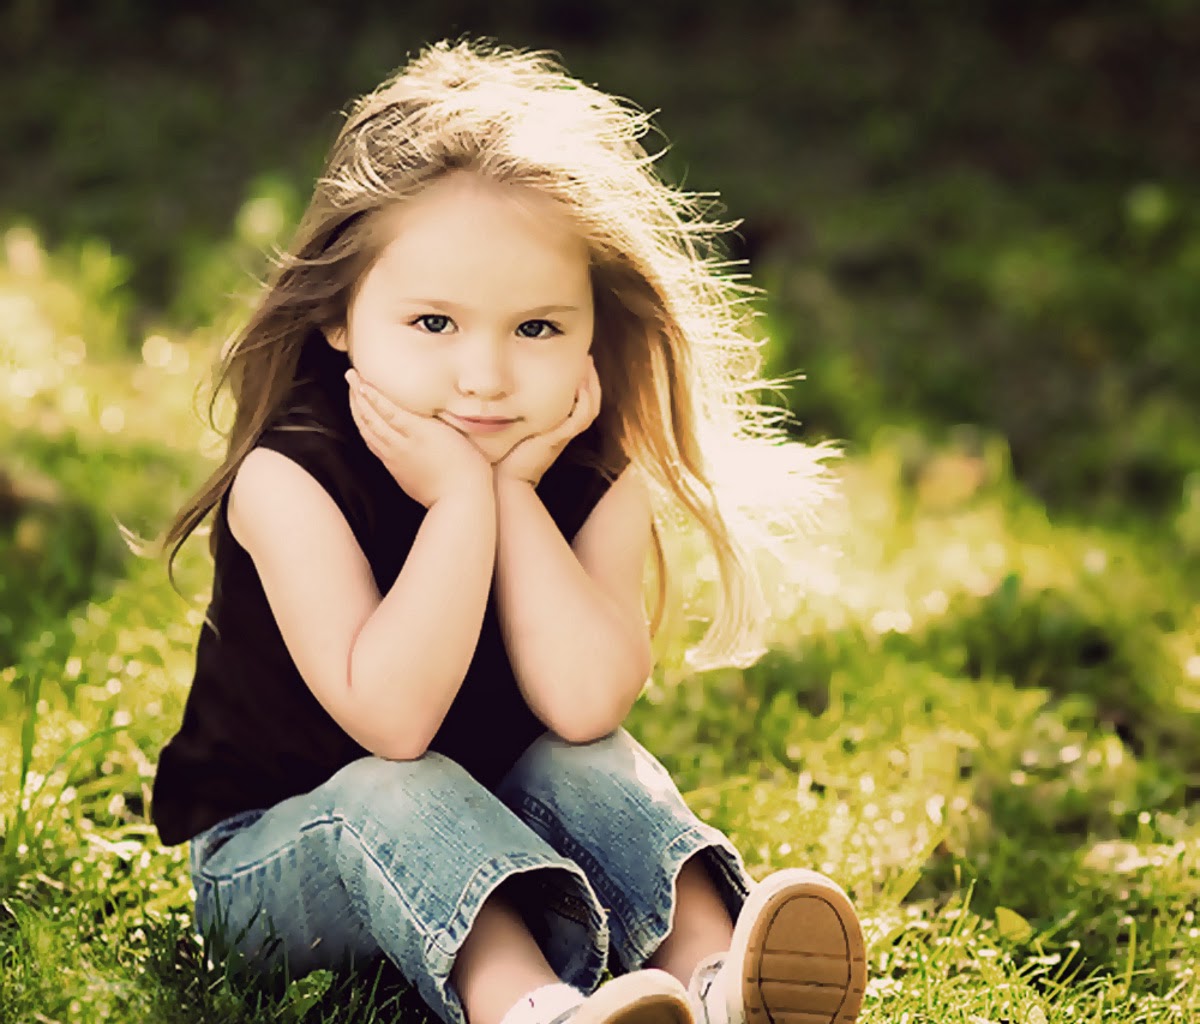  Kids WallpapersCute Baby Girls Wallpapers in HD High Quality